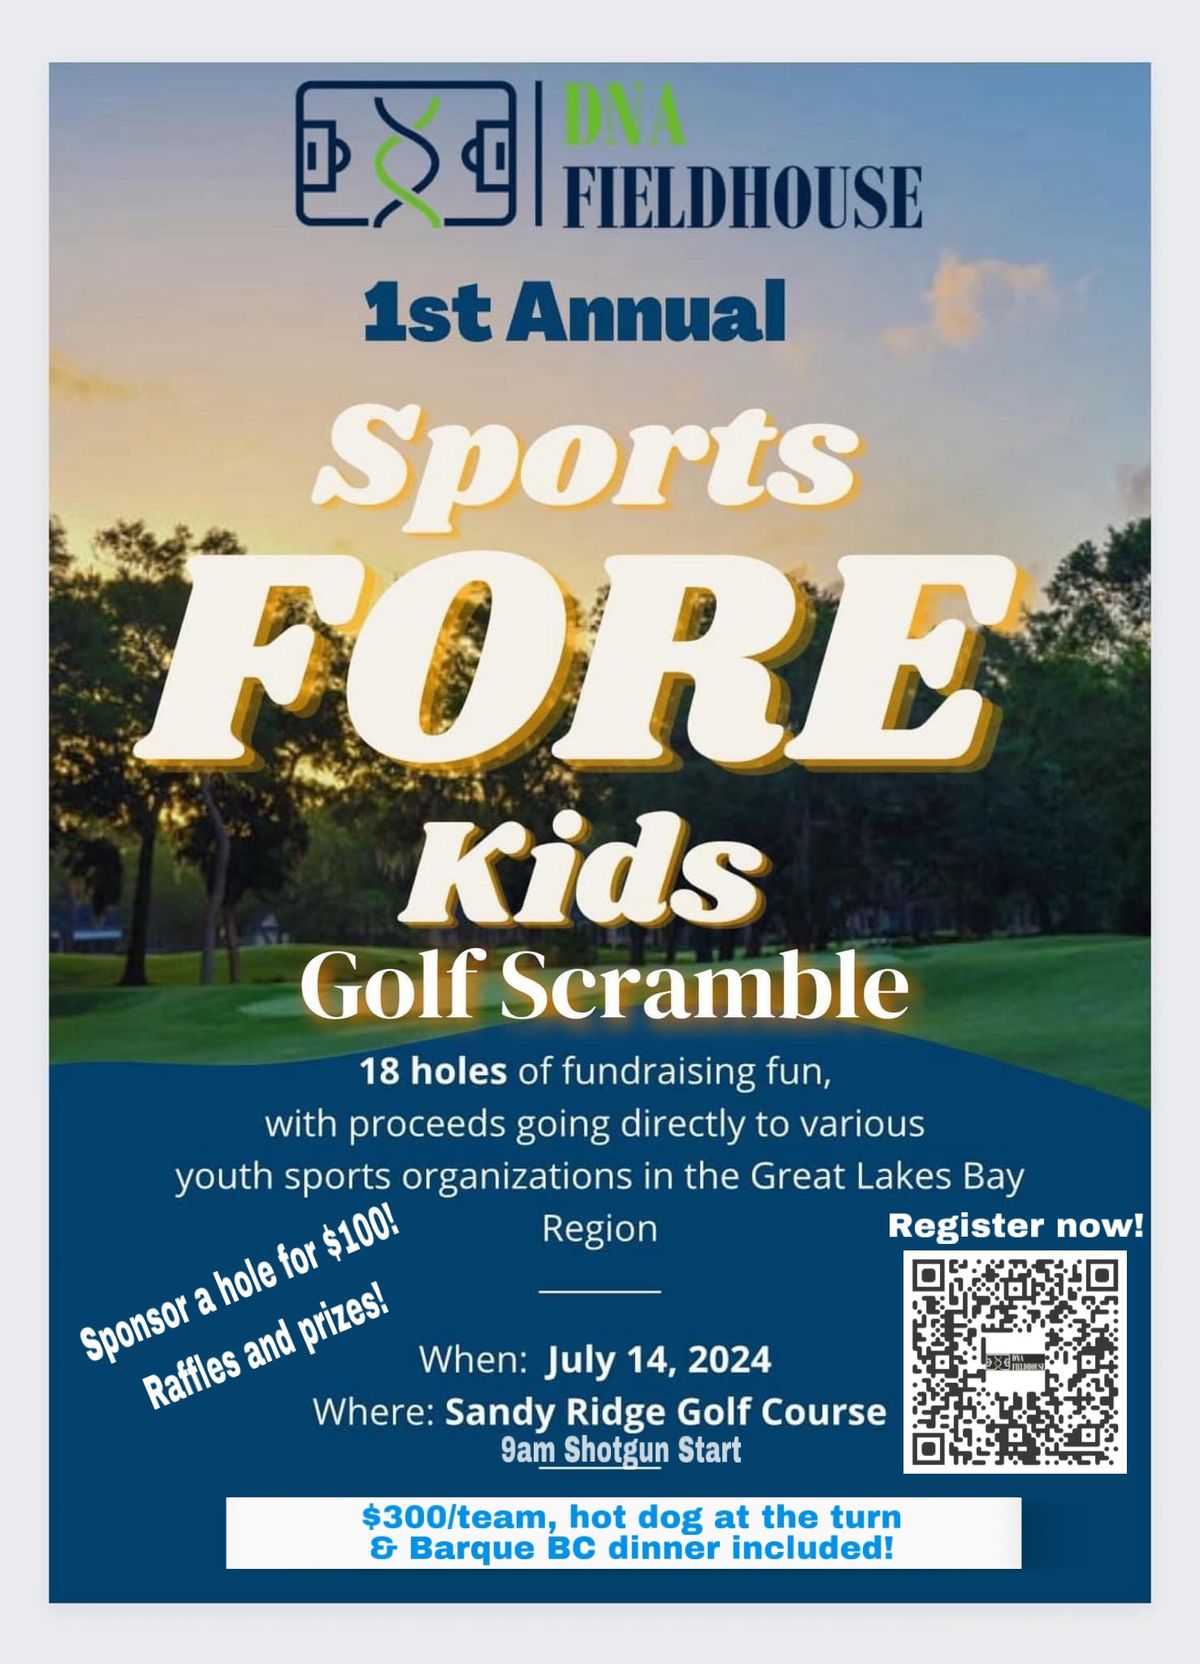 Golf Scramble for Sports for KIDS